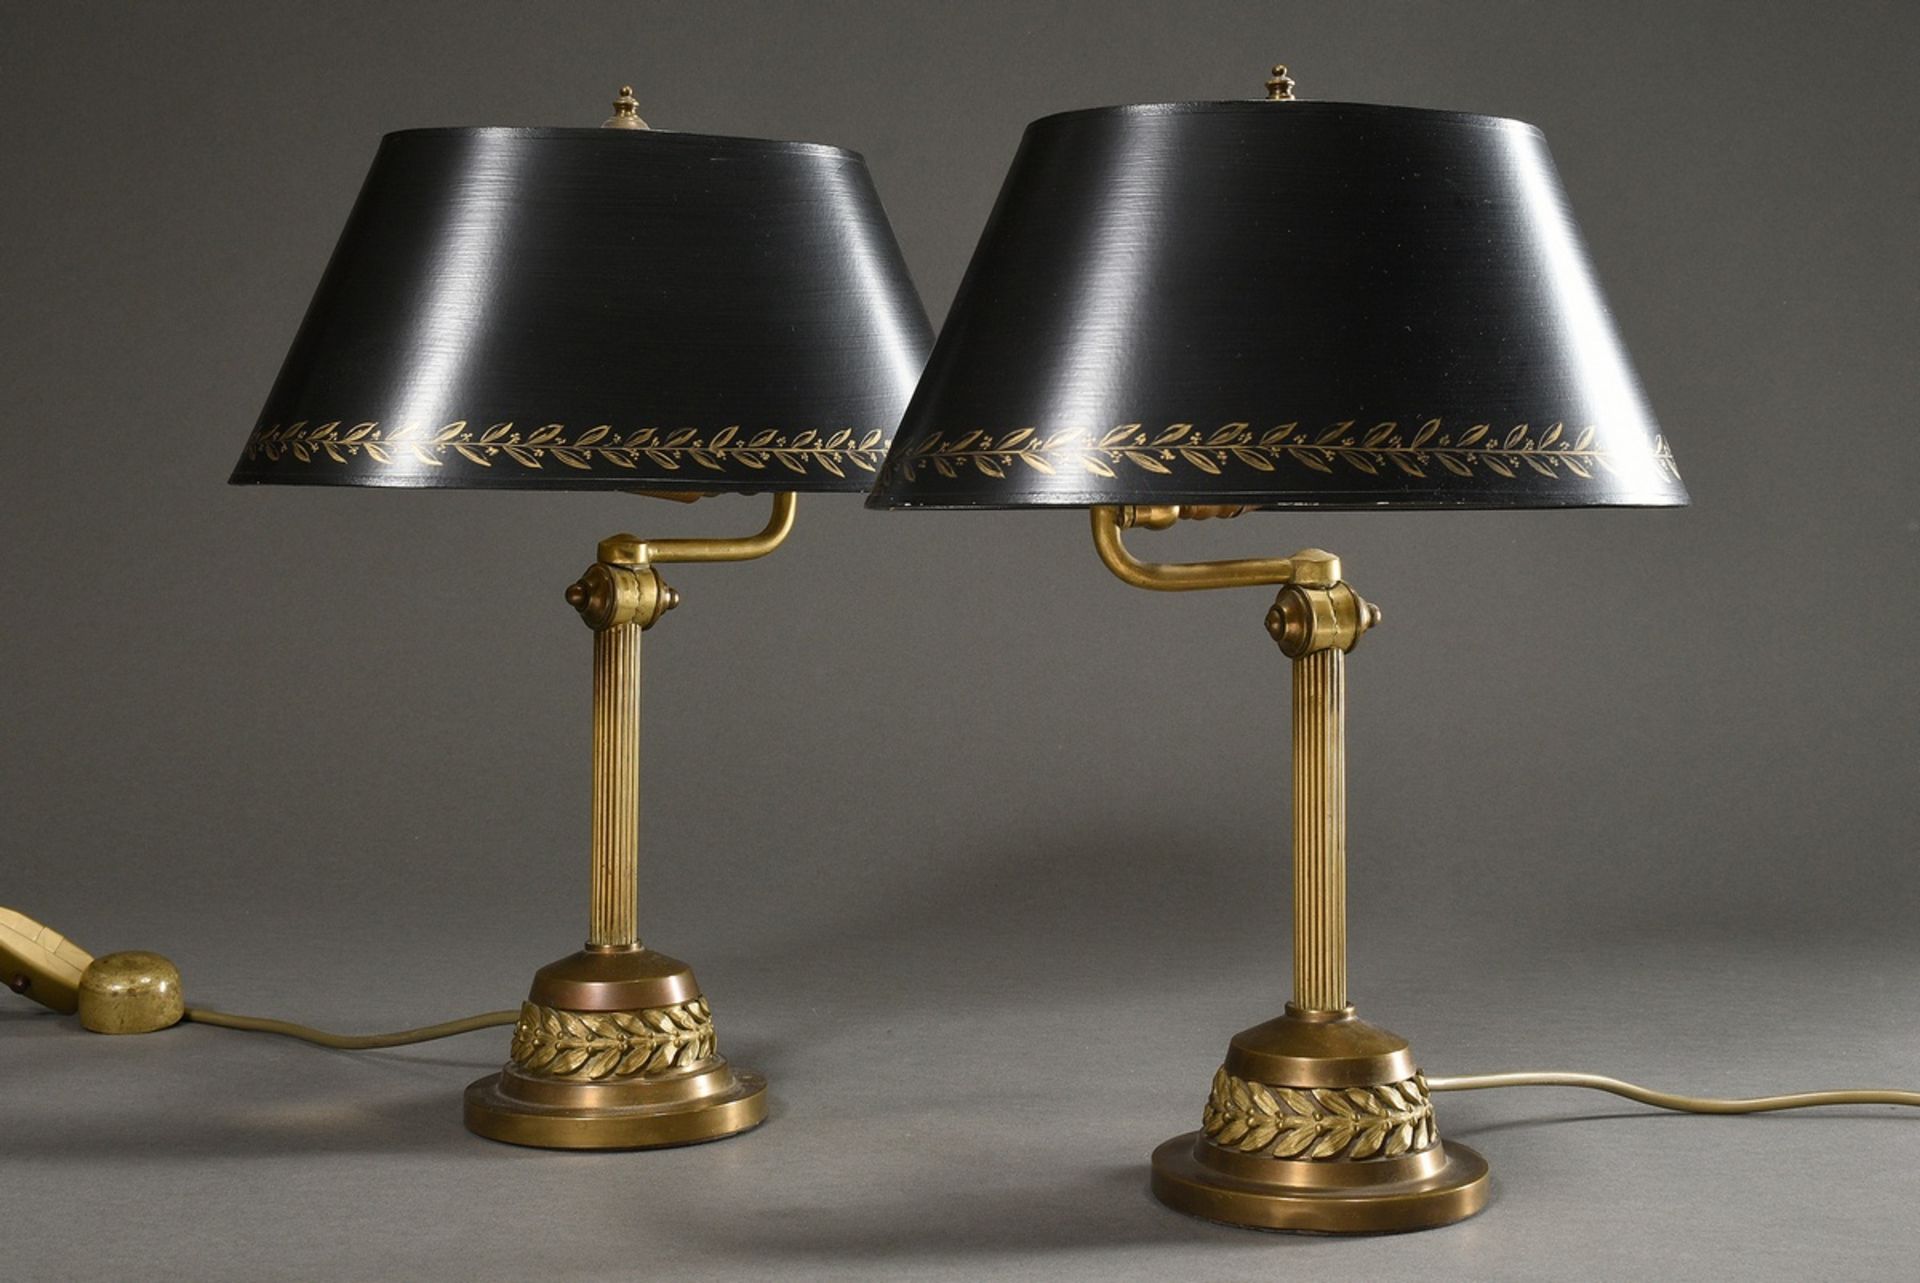 Pair of bronze column lamps with laurel rim on base and on the adjustable black shades (handmade),  - Image 2 of 7